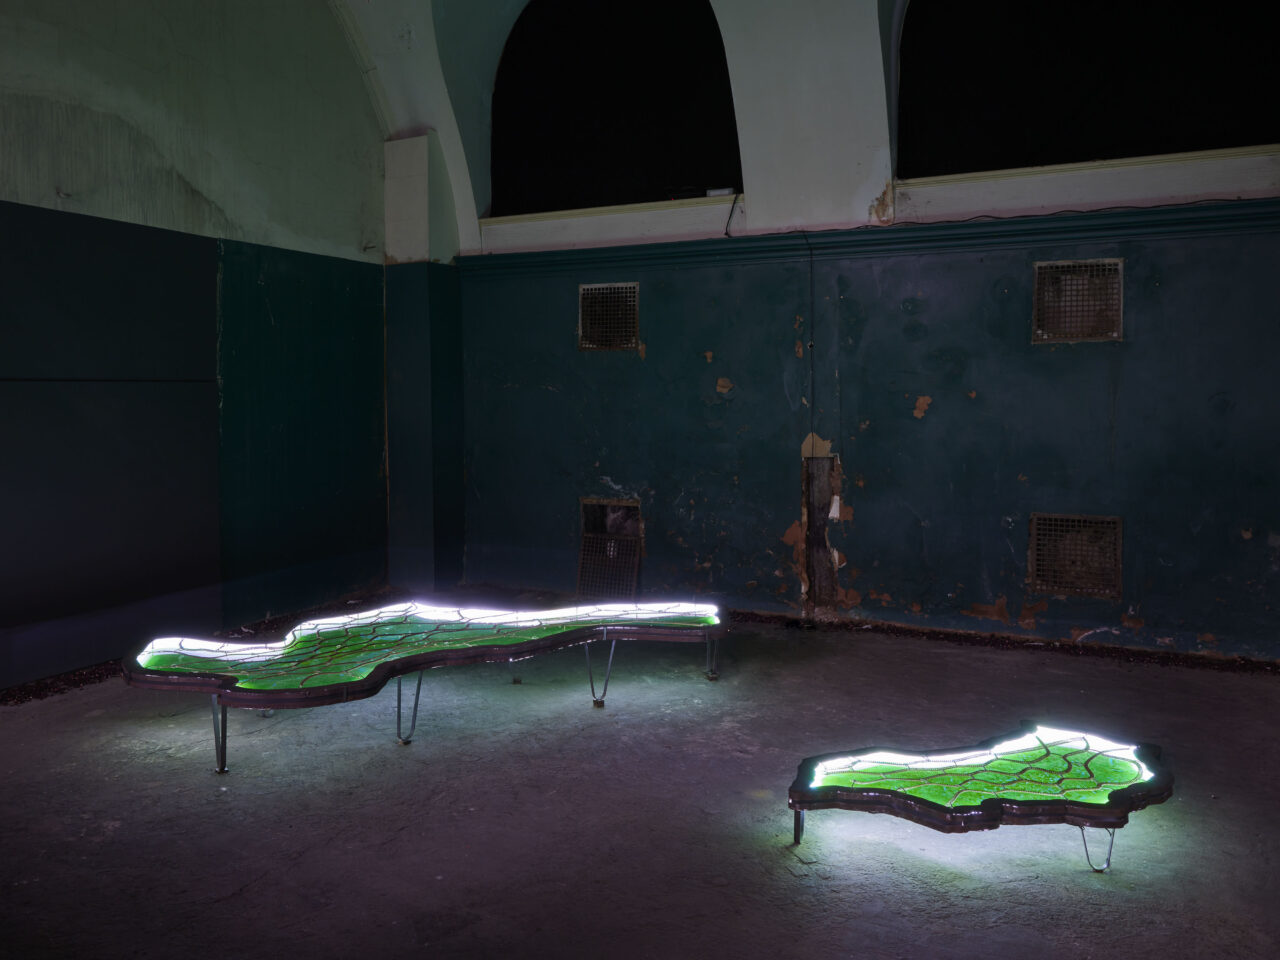 An installation of two green irregular shaped metal bed frames, filled with green liquid and lit up with LED lights. Around the perimeter of the room are dried herbs and flowers.